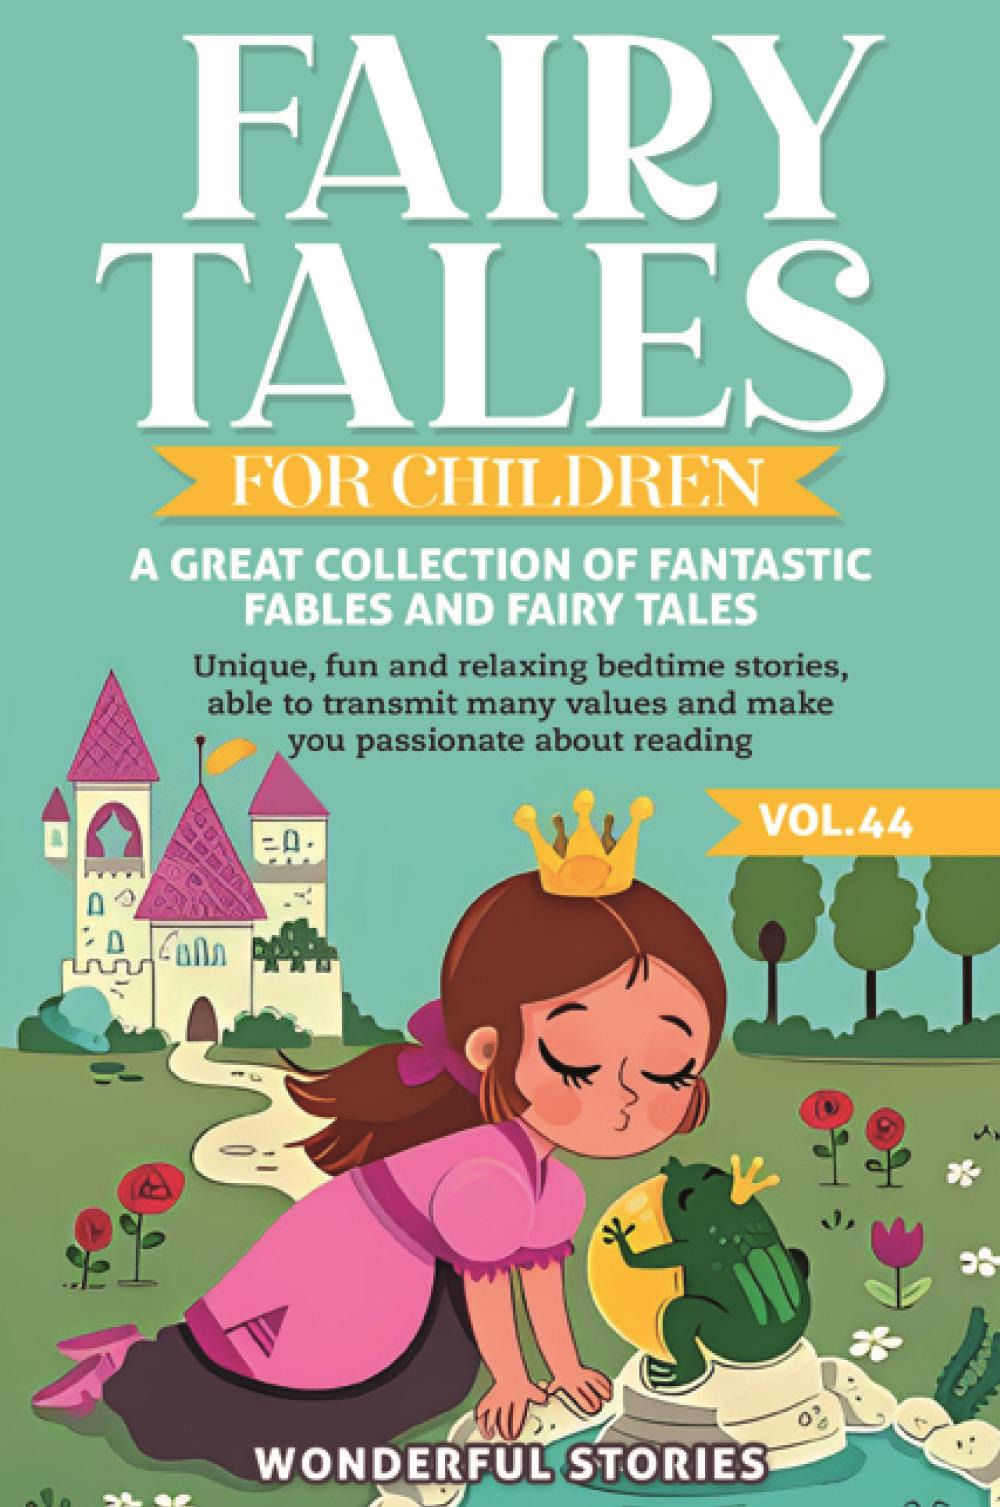 Fairy tales for children. A great collection of fantastic fables and fairy tales. Vol. 44